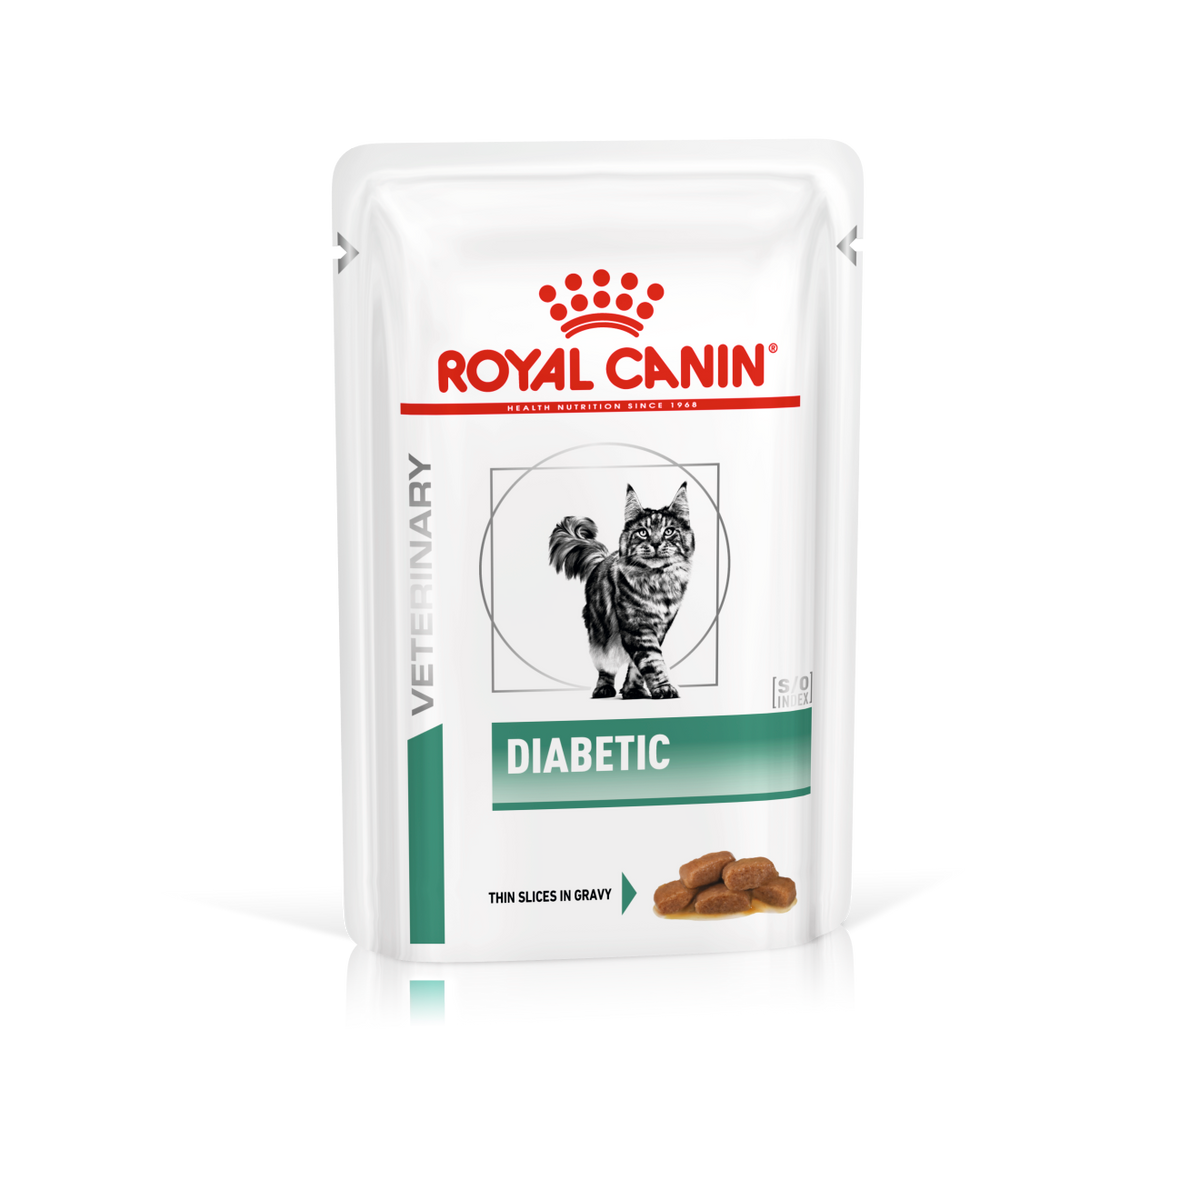 Royal Canin Diabetic Pouch for Cats